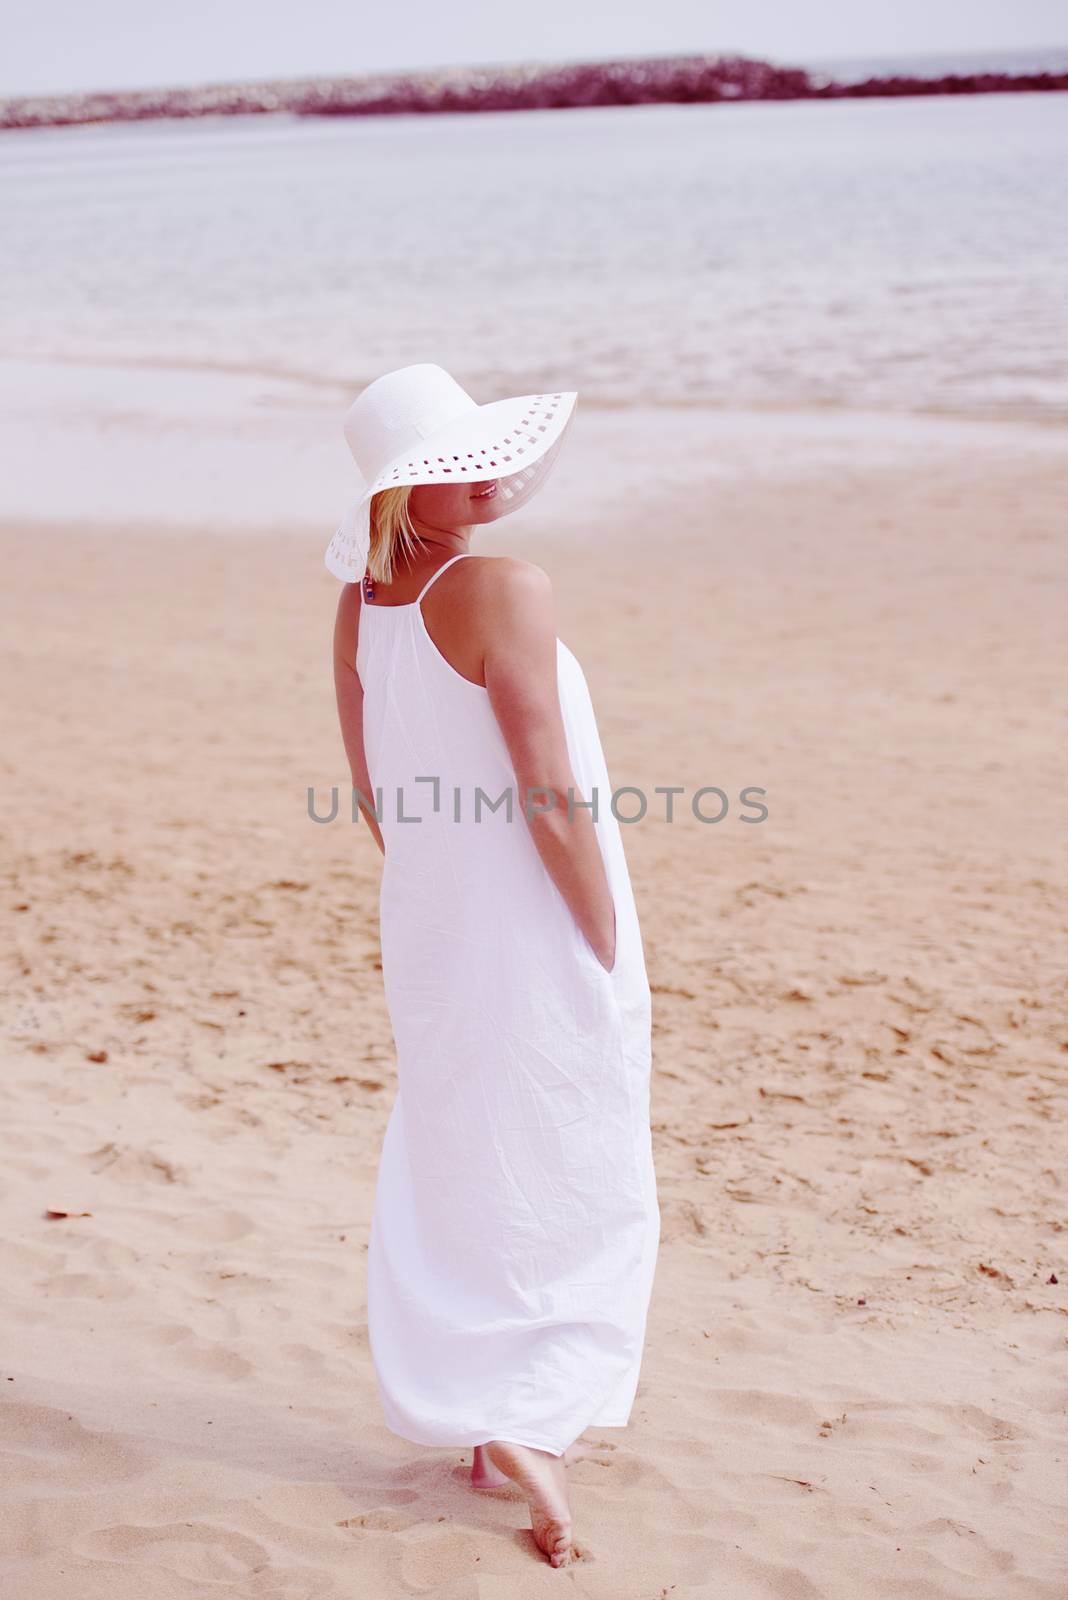 Woman walking on beach in long white dress and hat